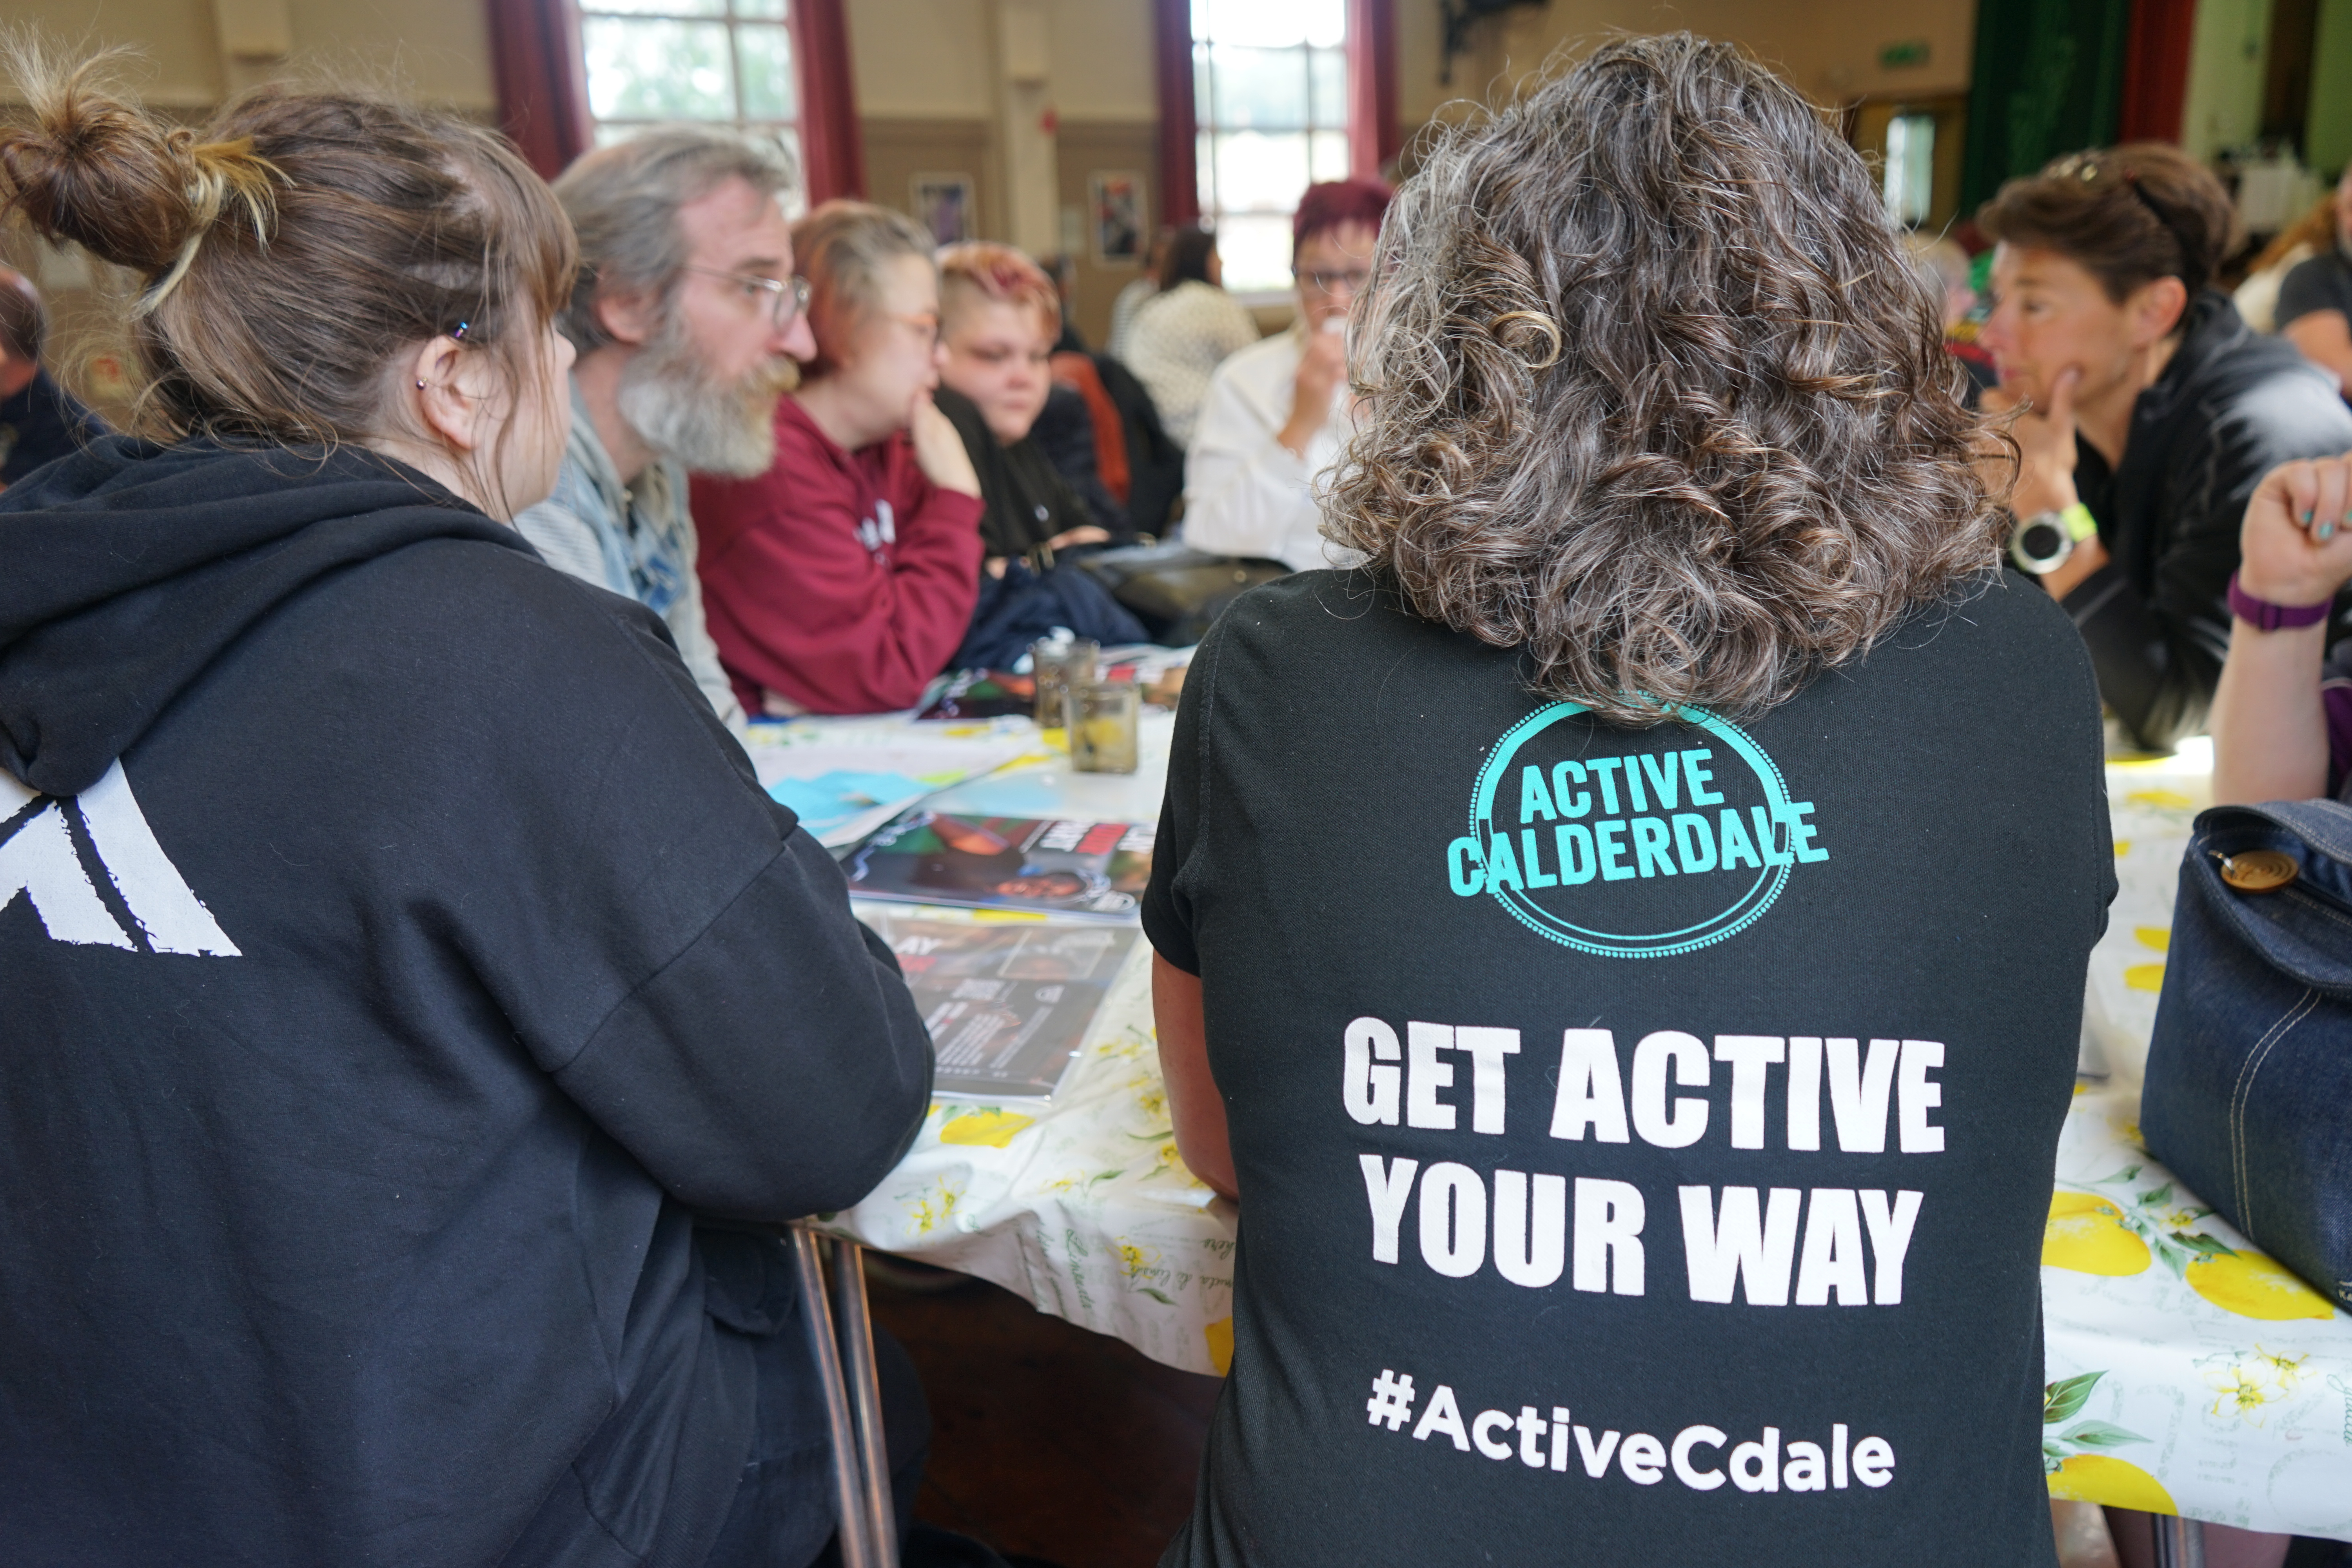 People around a table talking, and a lady with a top that says 'Active Calderdale. Get active your way. #ActiveCdale'